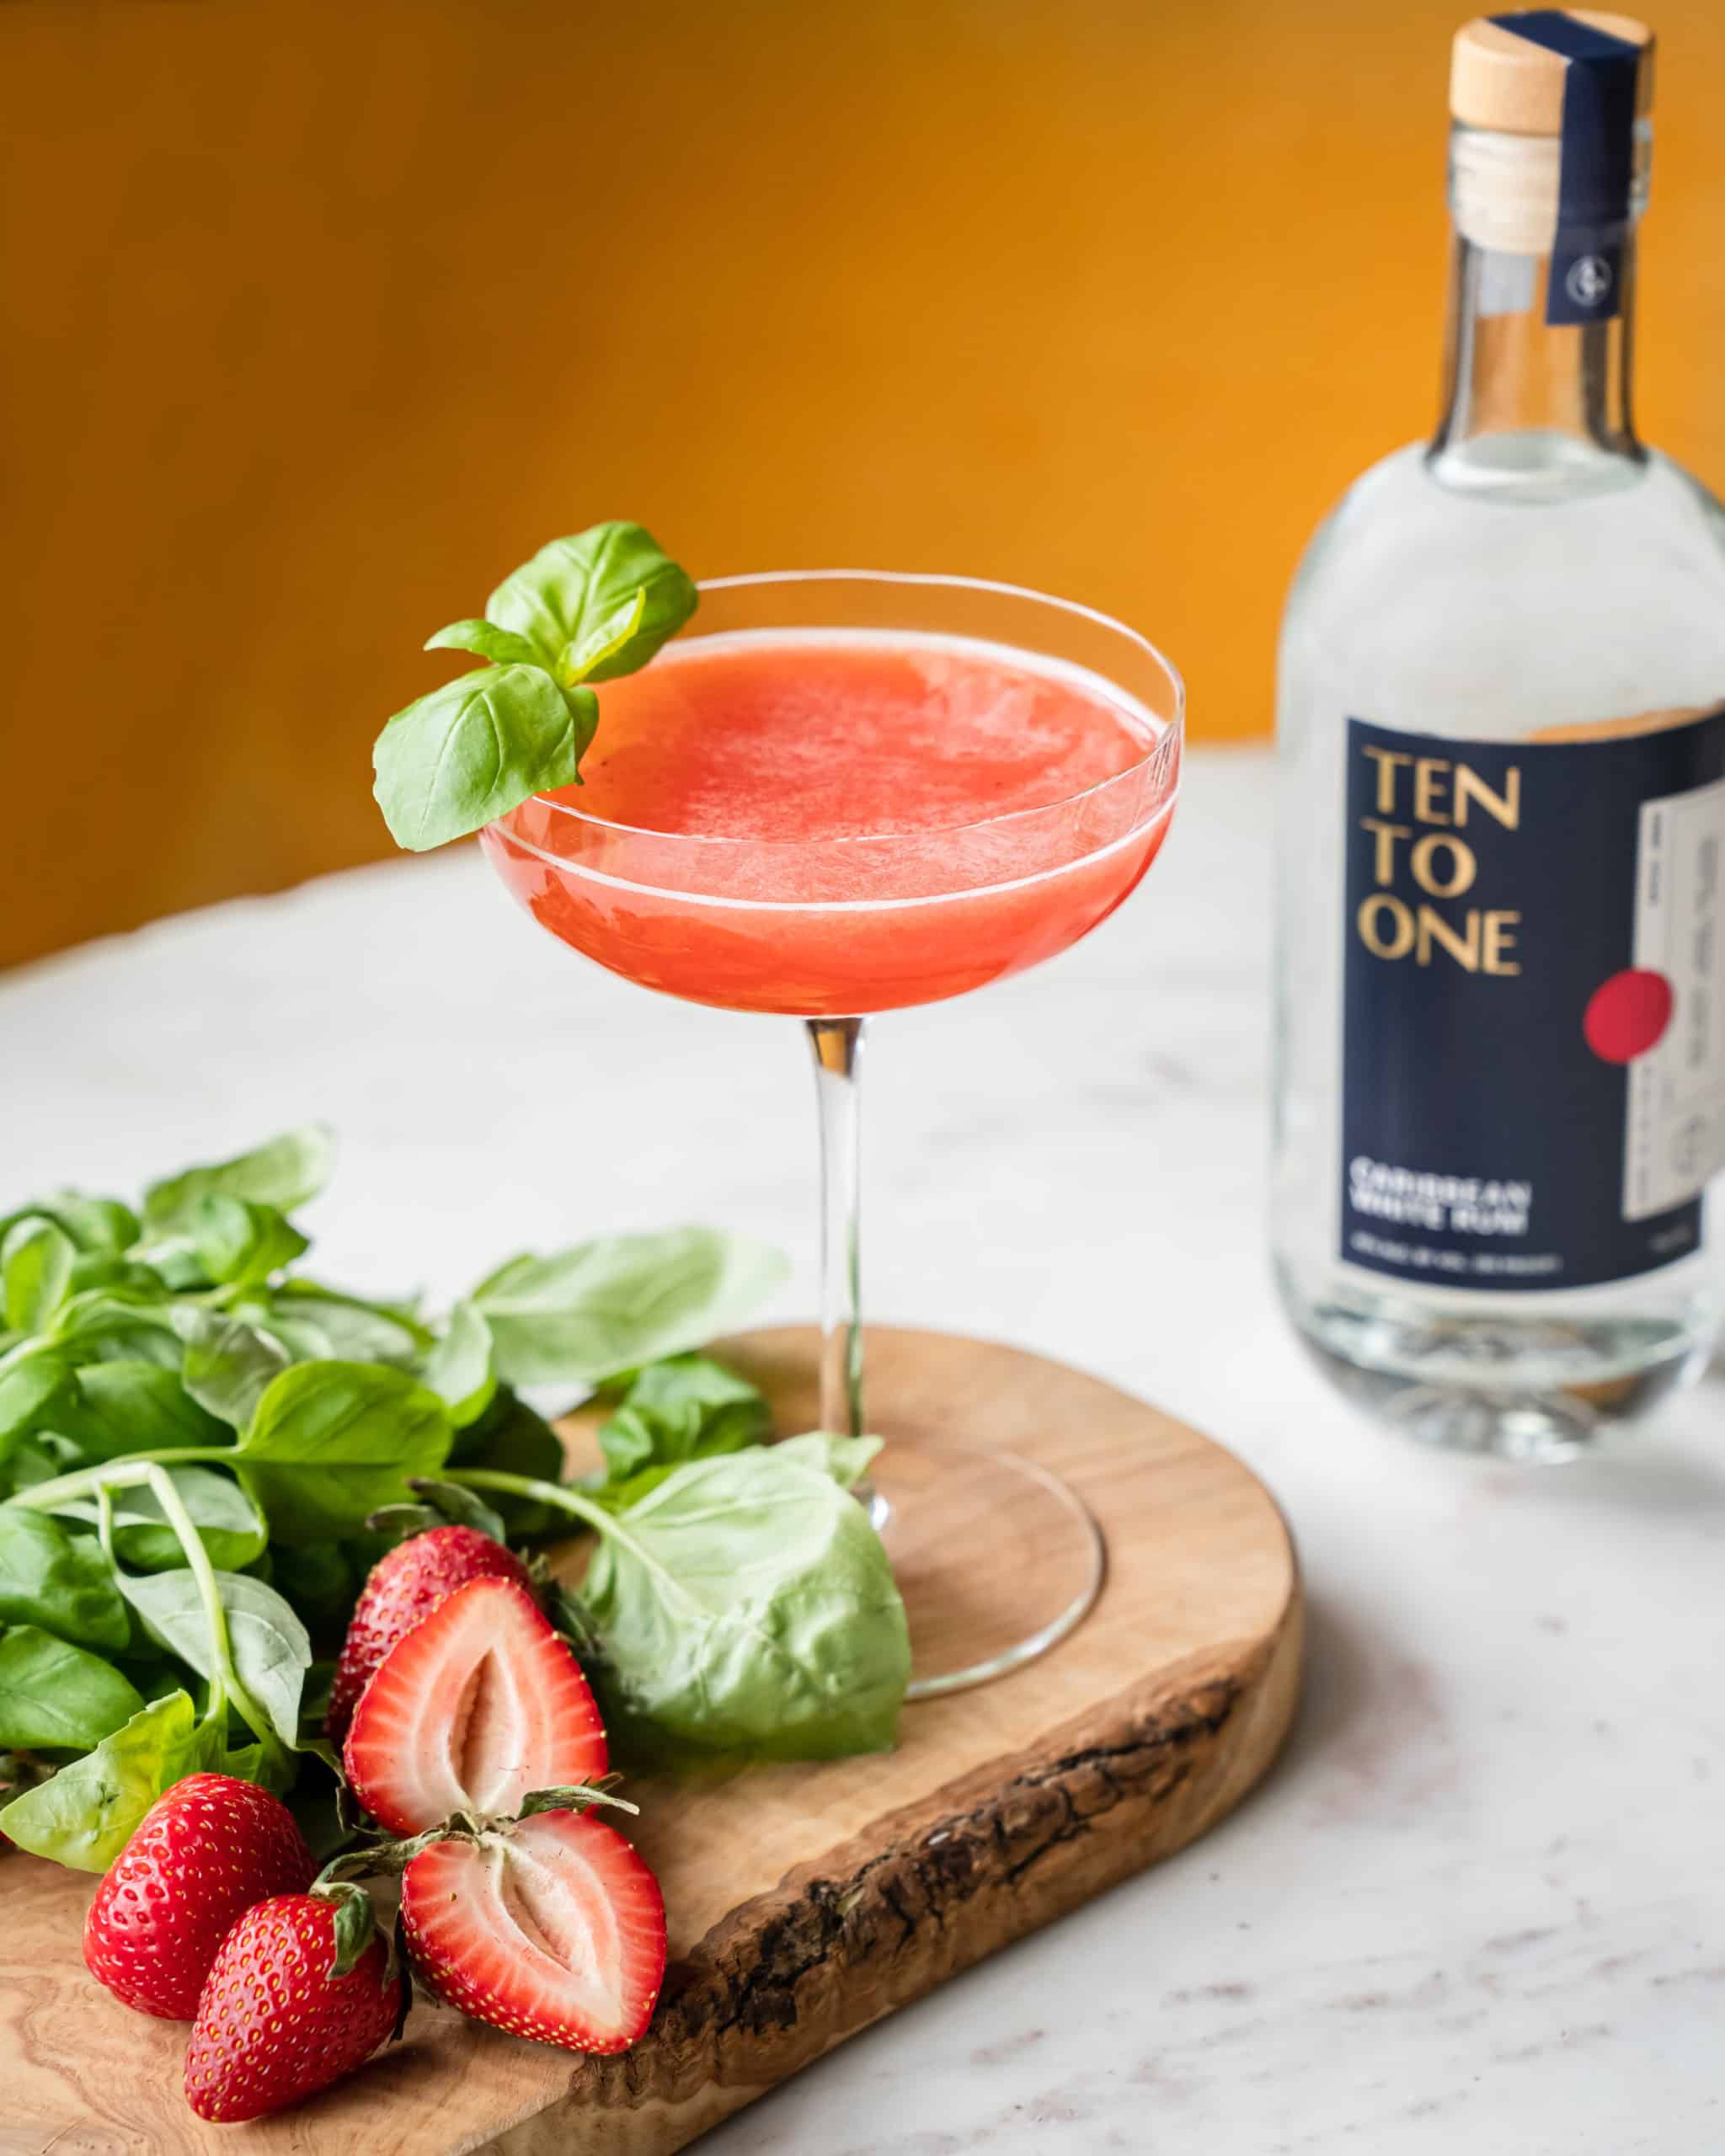 Strawberry Basil Daiquiri In Coupe with Ten To One White Rum